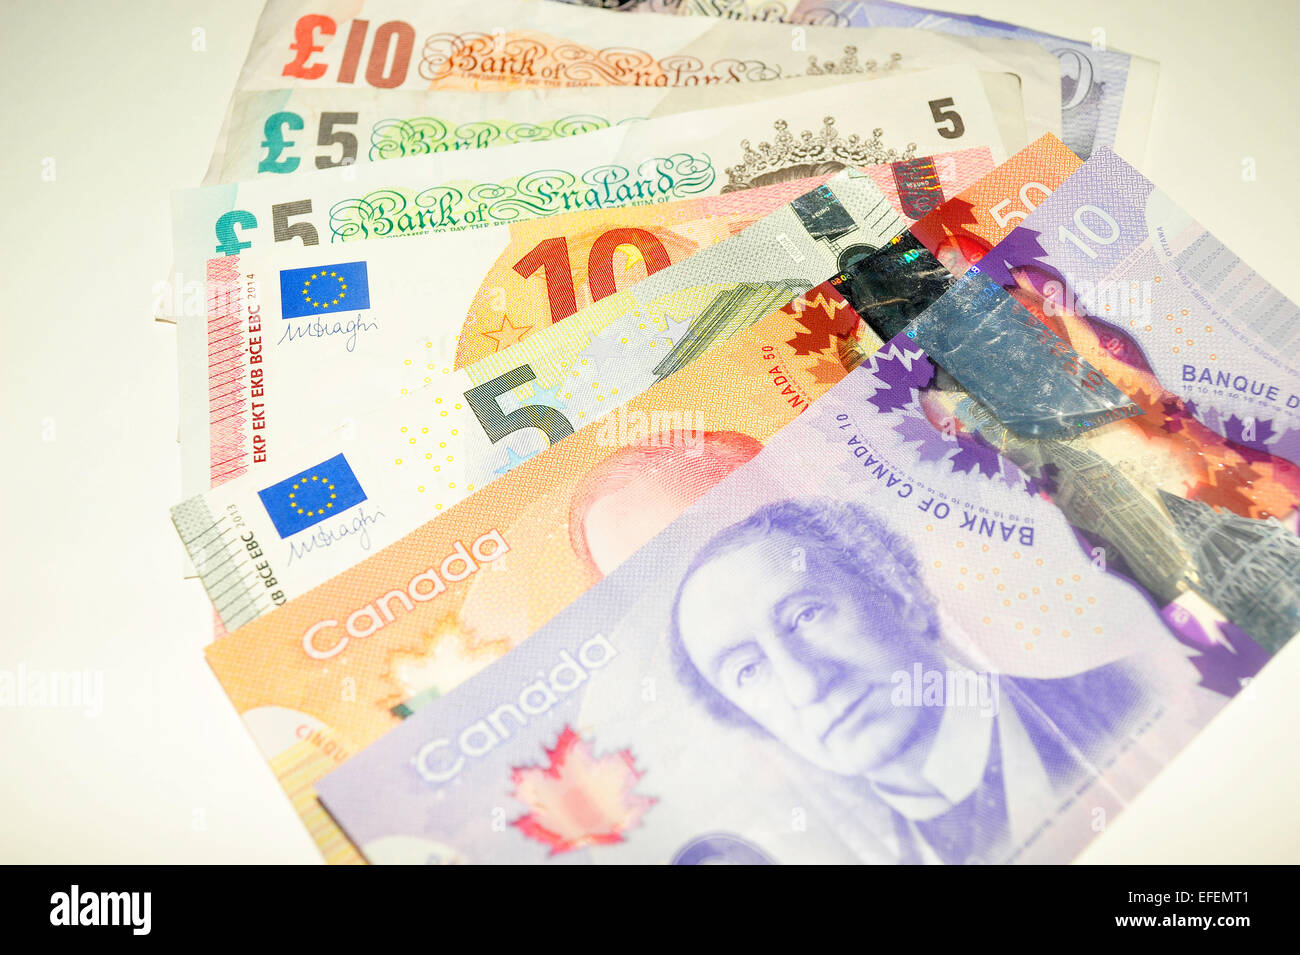 British Pound notes, Canadian Dollar notes and European Euro notes photographed against a white background. Stock Photo